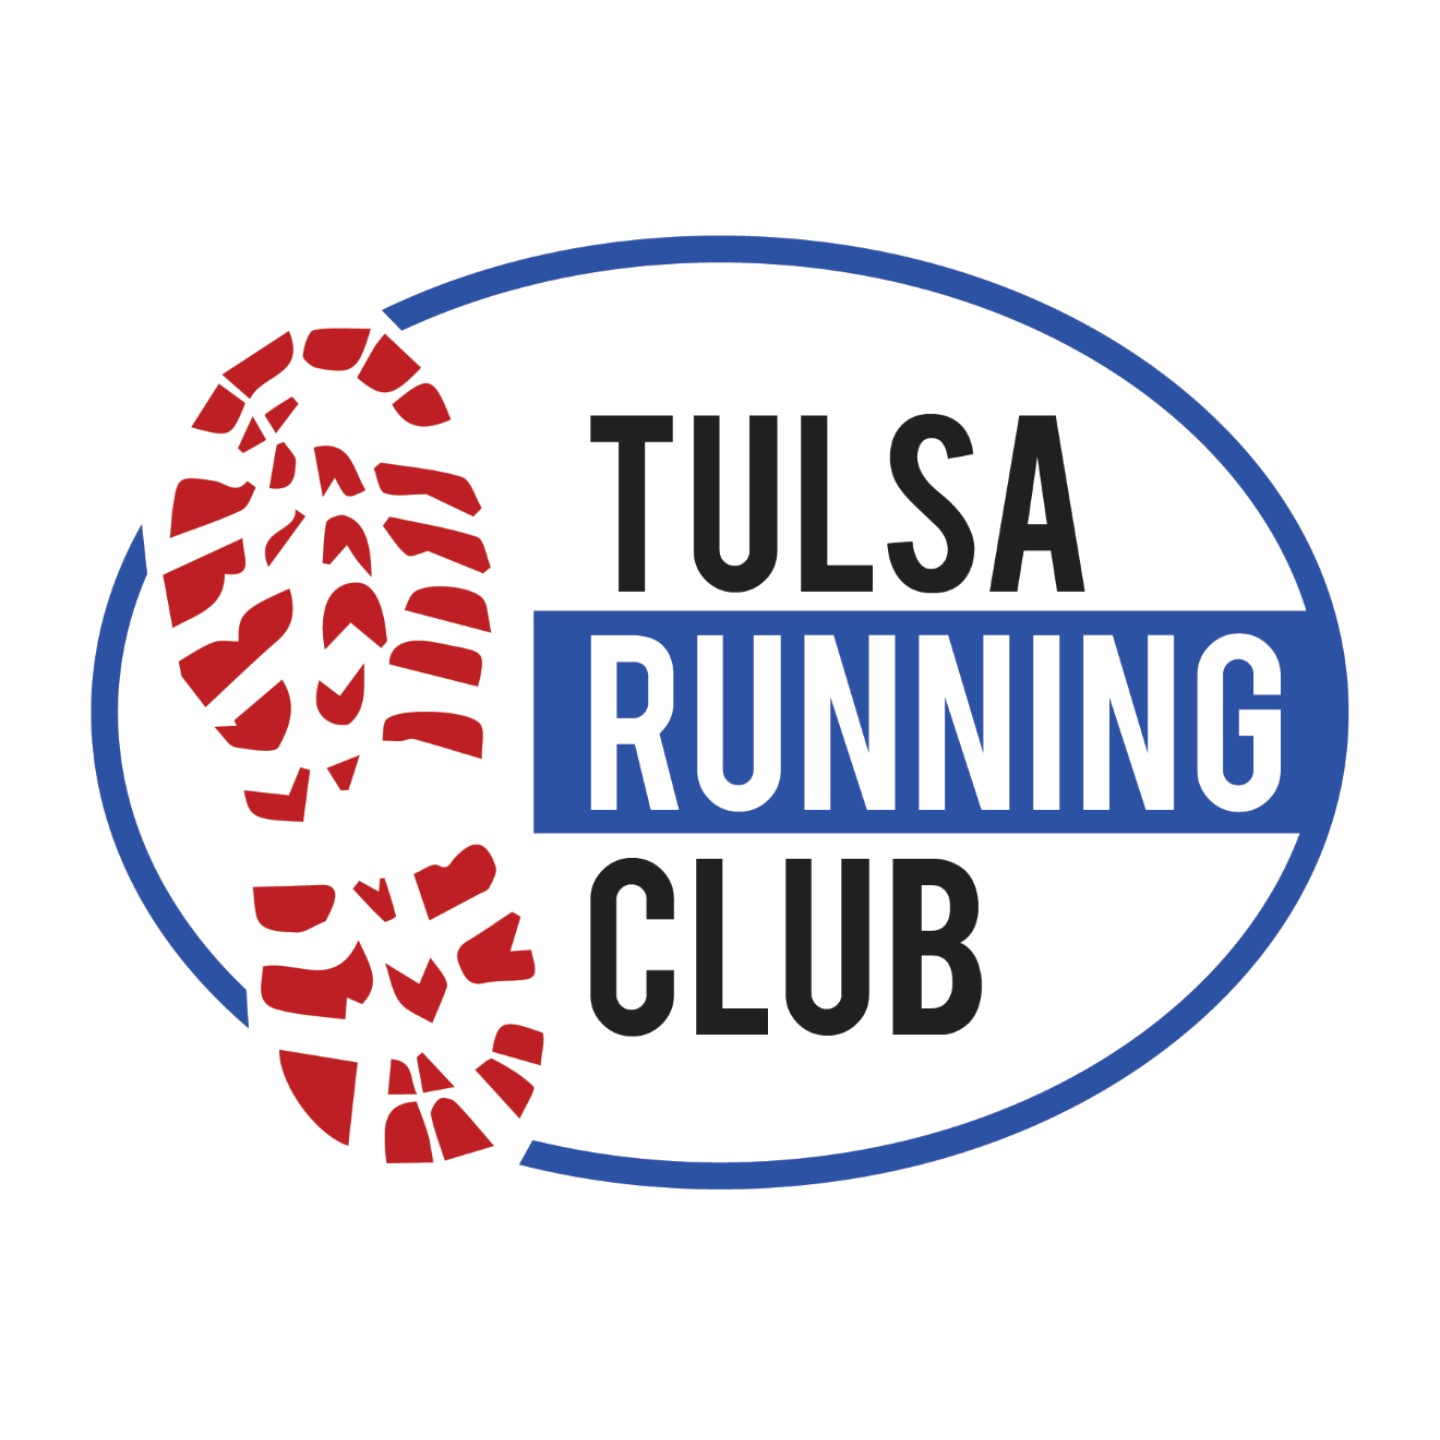 St. Patrick's Day Run Tulsa in Tulsa, OK Details, Registration, and